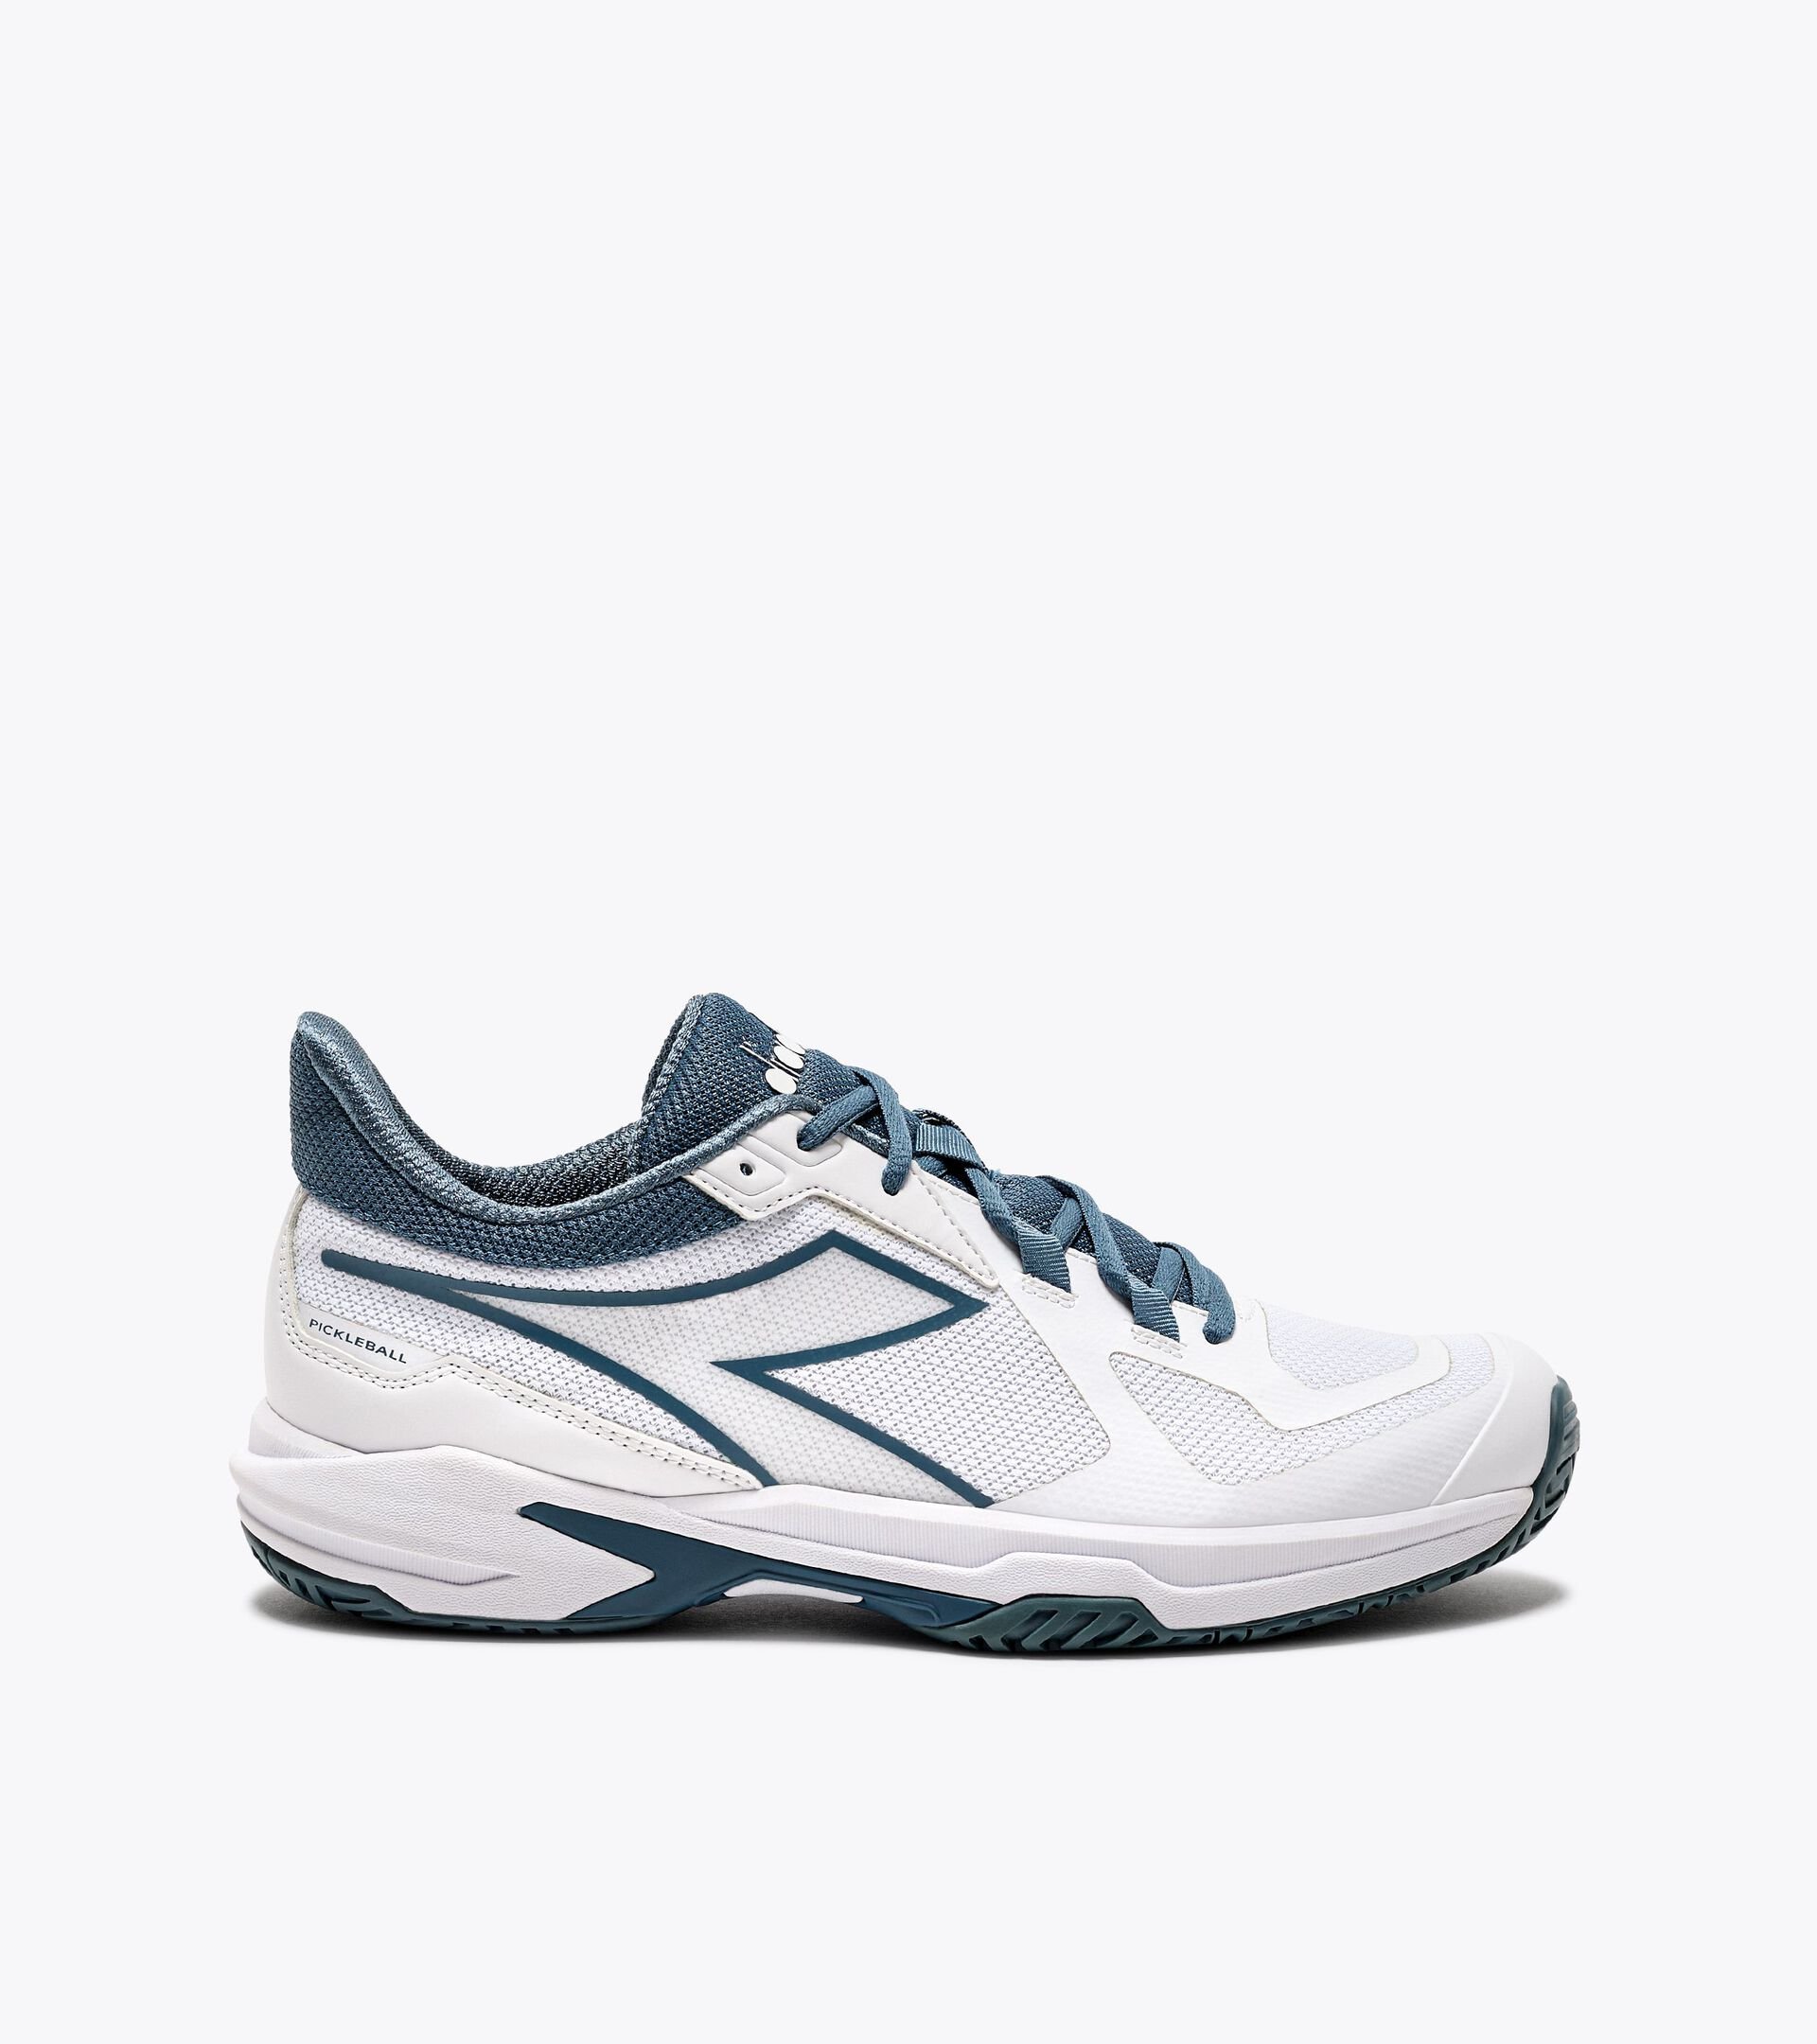 Pickleball shoes for hard surfaces or clay courts - Men TROFEO 2 AG PKL WHITE/OCEANVIEW - Diadora